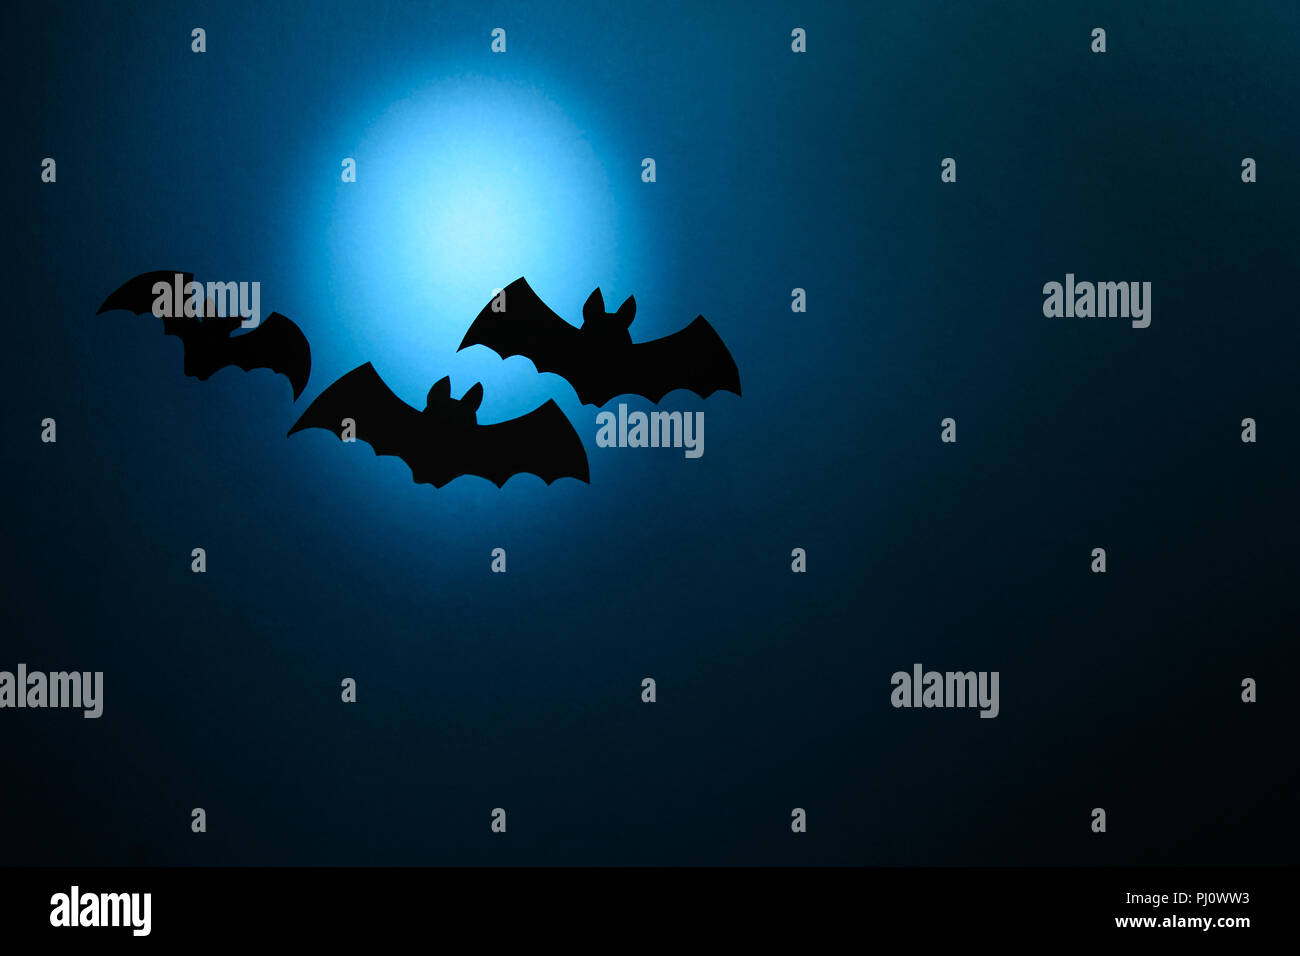 Black paper bats flying on dark blue background. Halloween concept. Paper cut style. Stock Photo